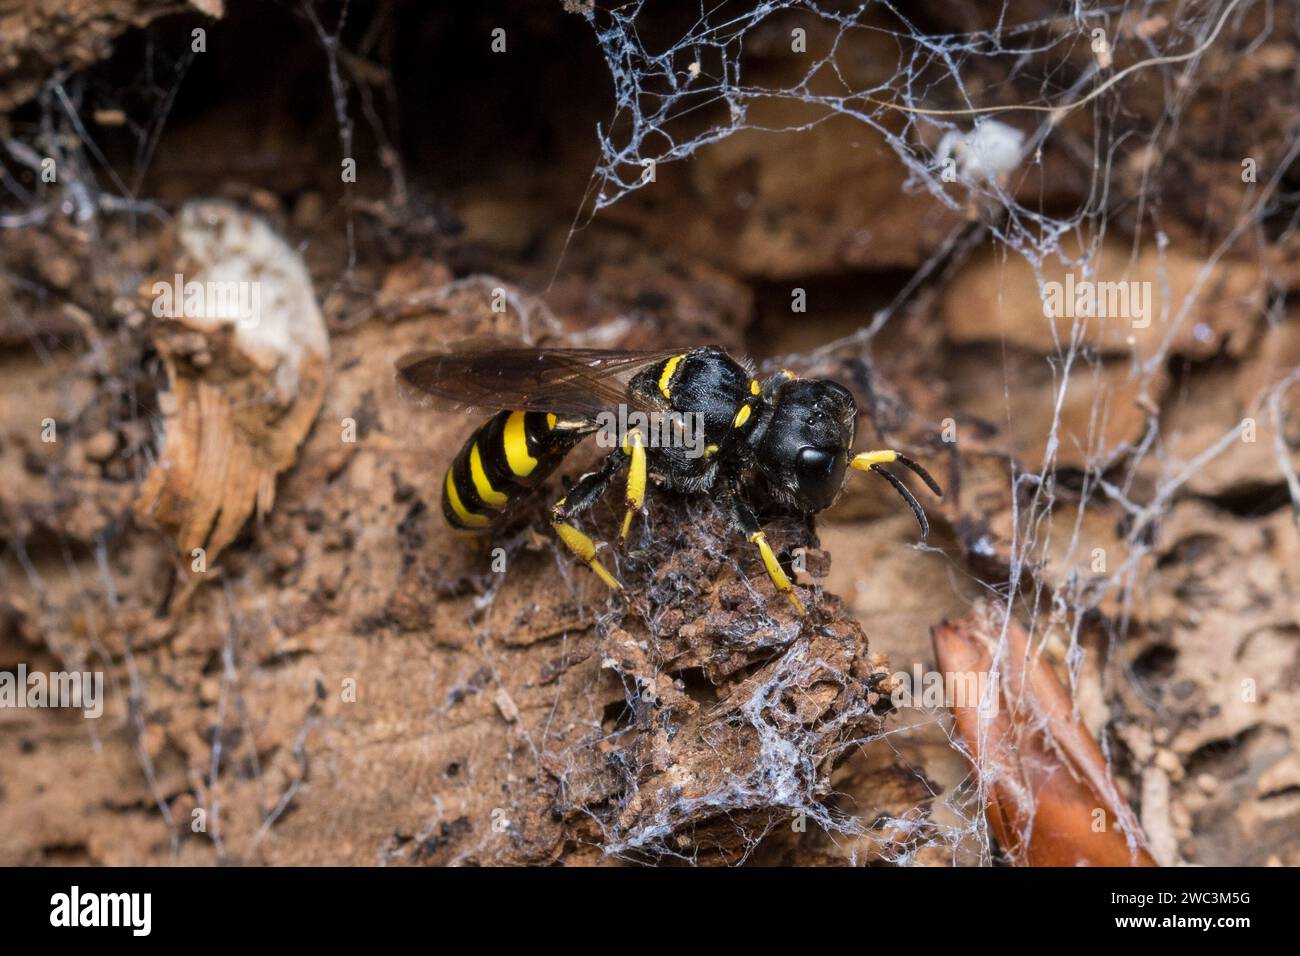 A female solitary wasp (Ectemnius sp) hunting for prey over a rotting log. Photographed in Sunderland, North East England. Stock Photo